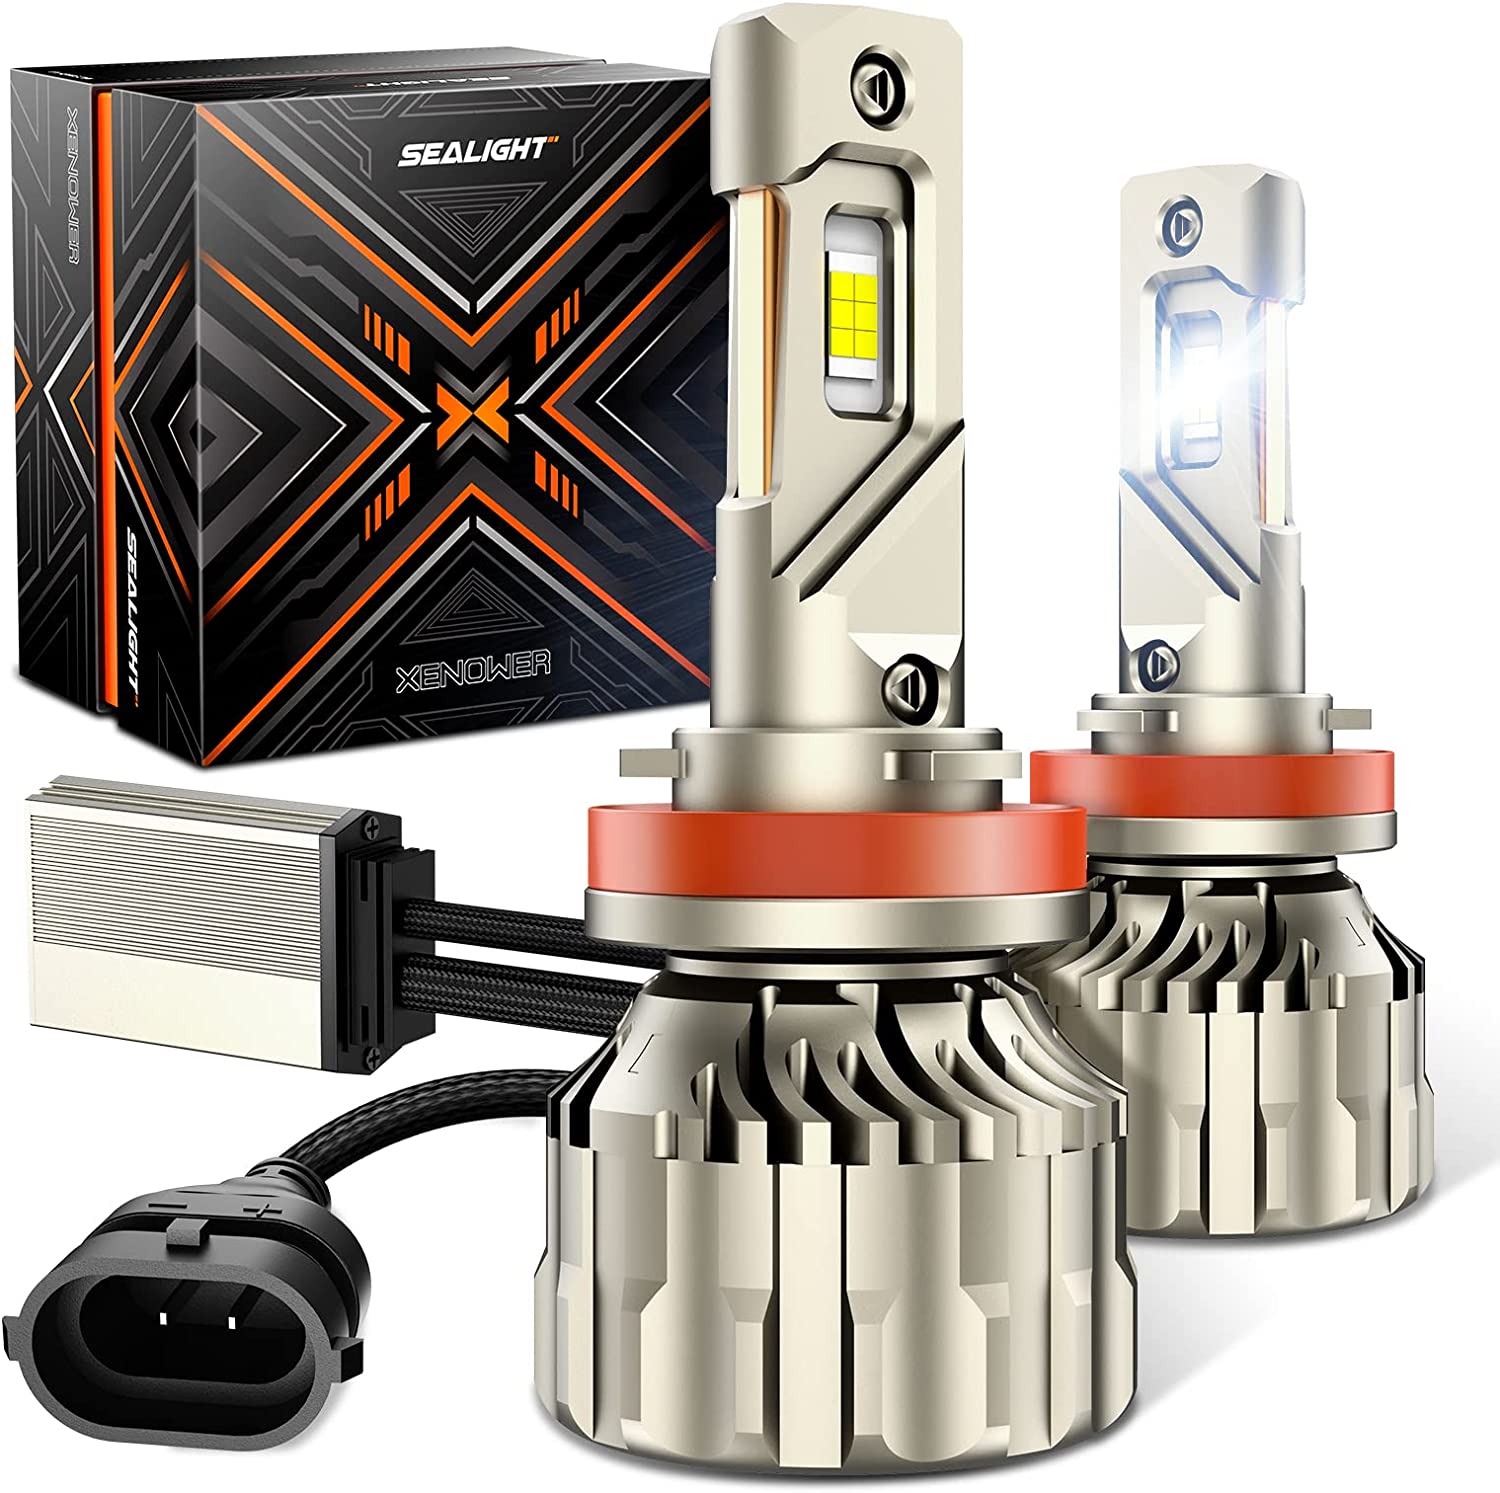 The Best and Brightest H9 LED Headlight Bulbs